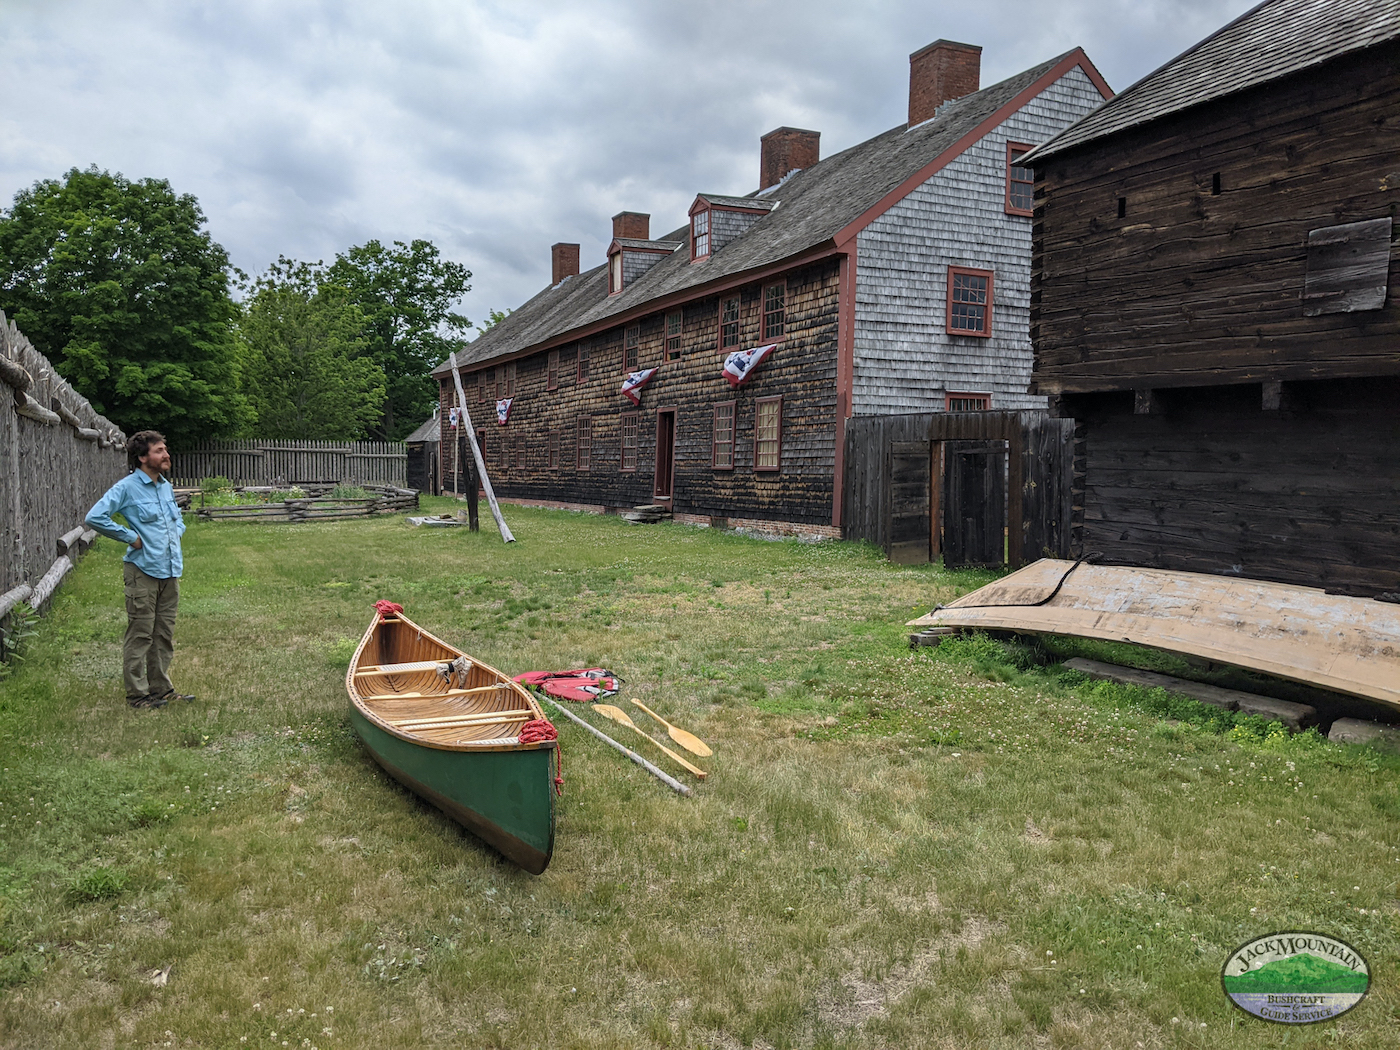 Canoeing The Benedict Arnold Trail by Ezra Smith